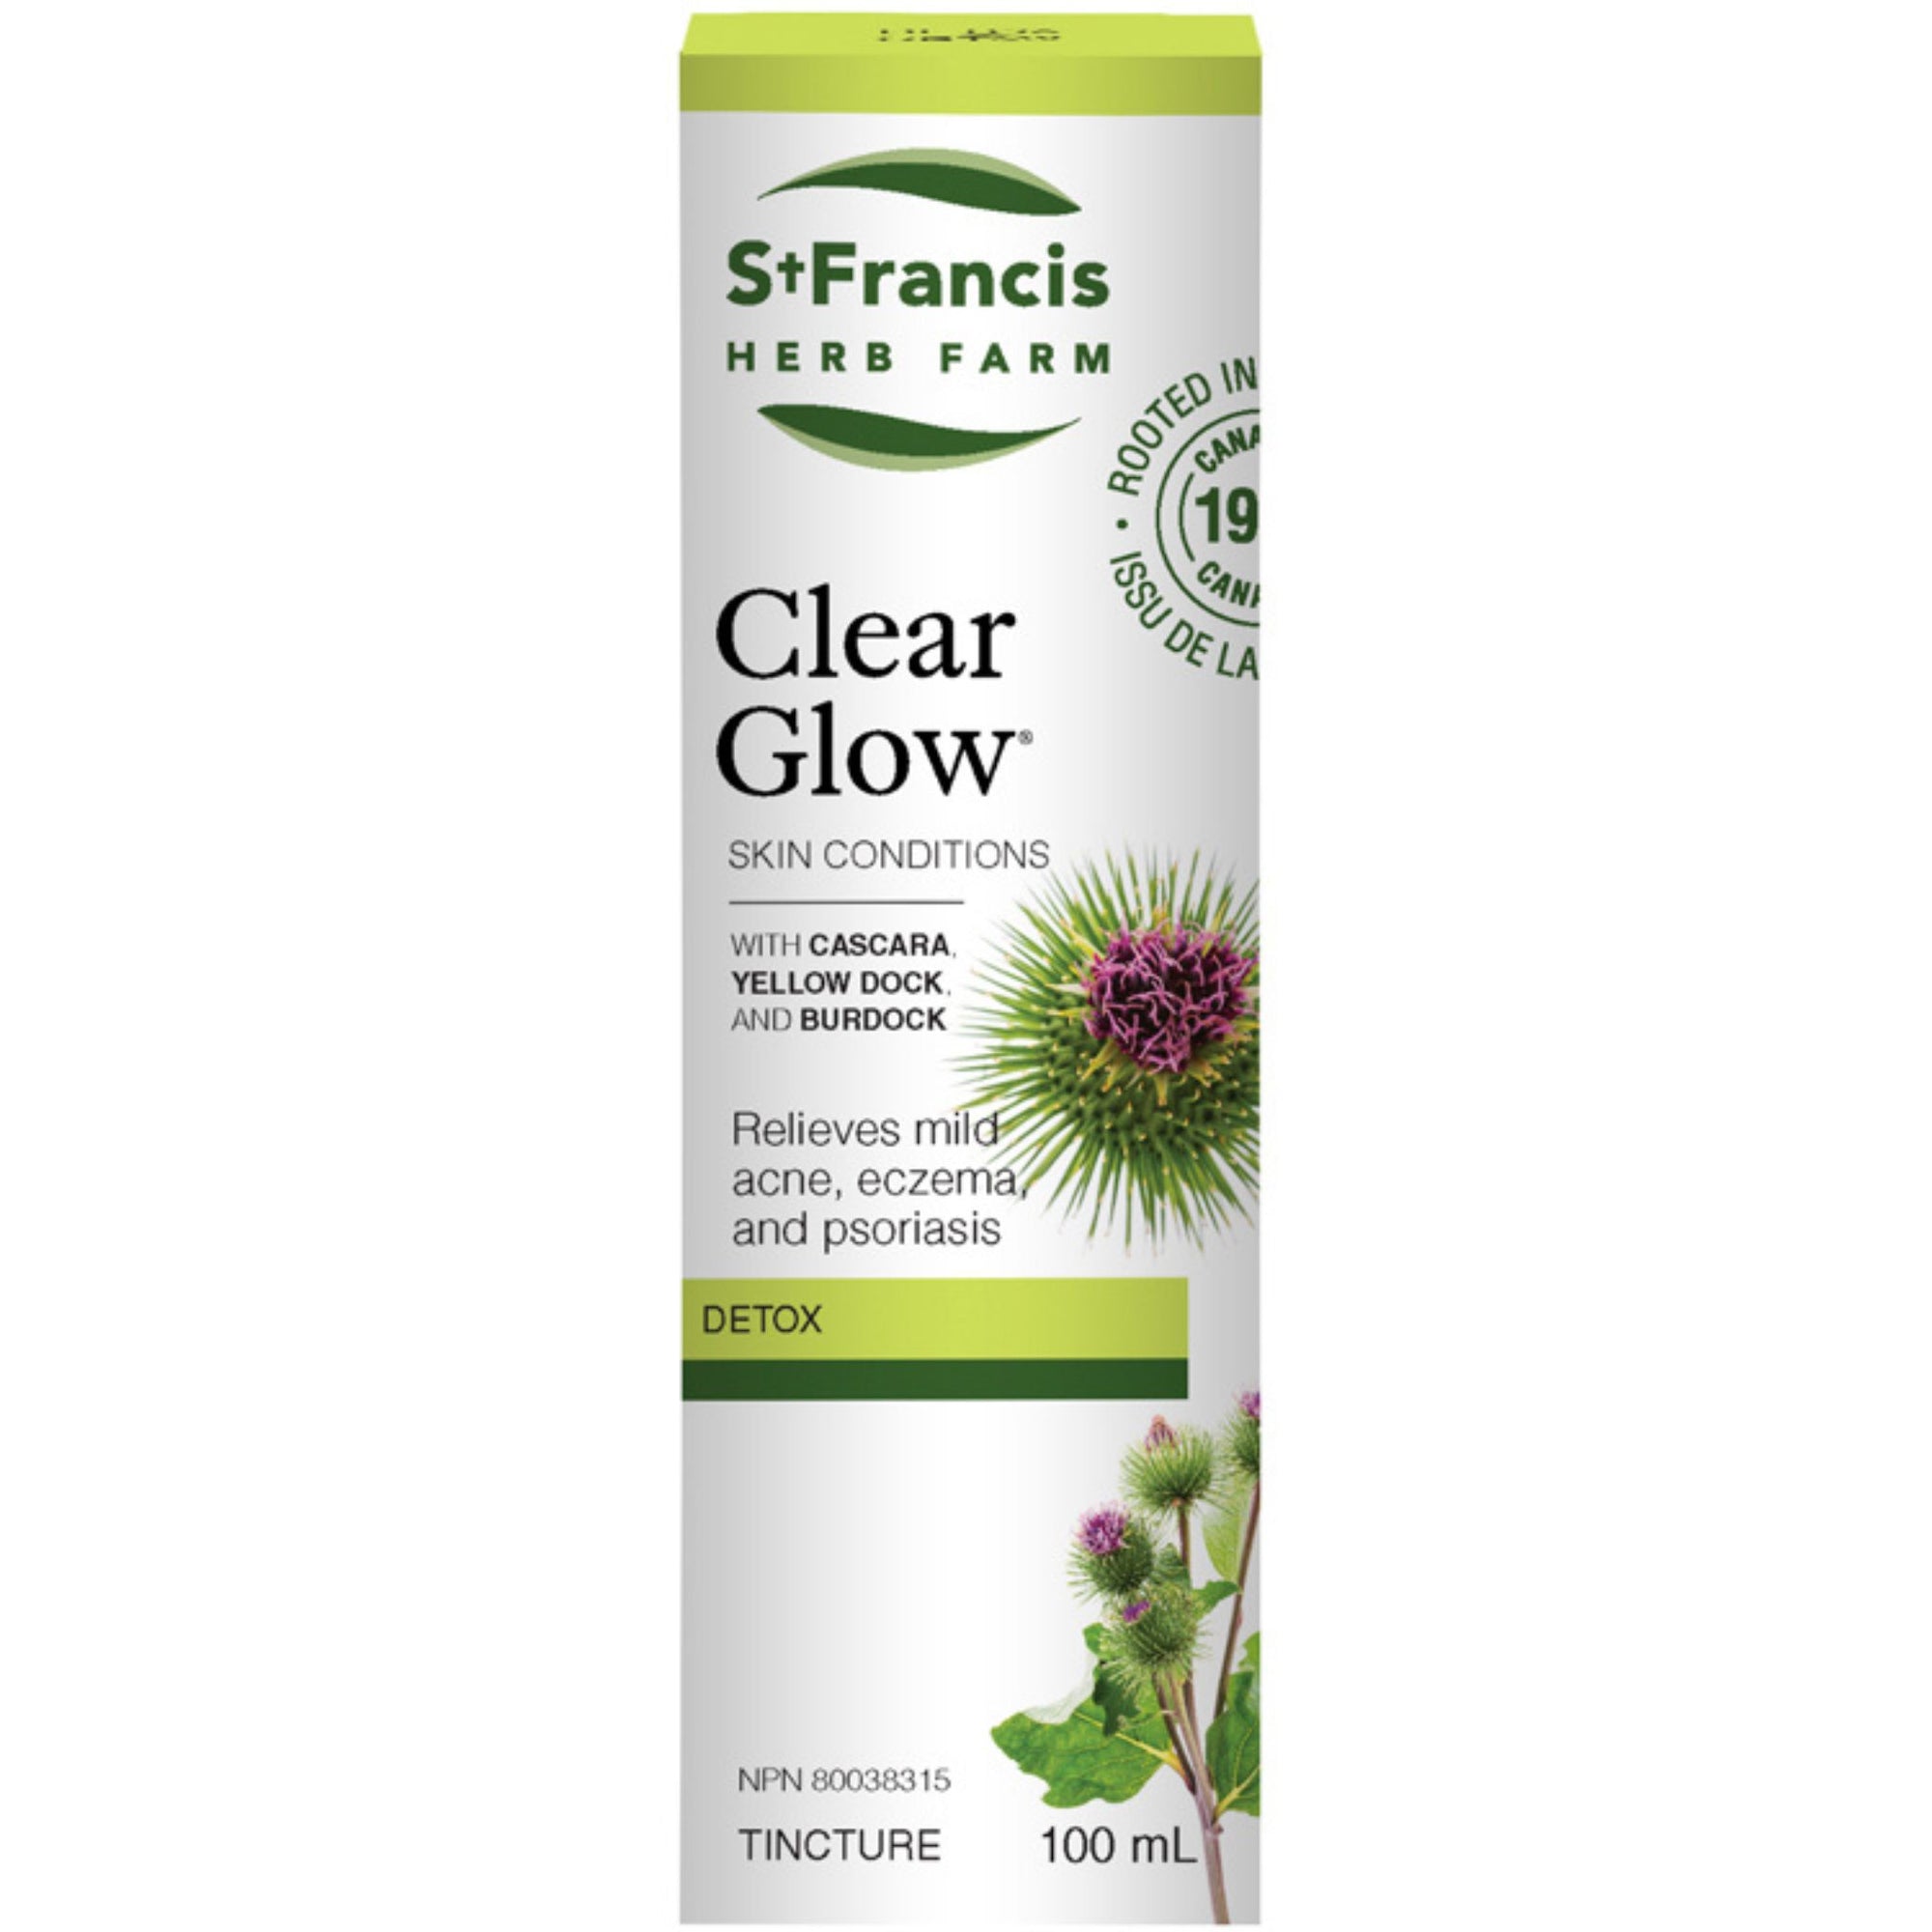 Image of St. Francis Clear Glow 50mL tincture - a supplement for skin conditions like mild acne, eczema and psoriasis.